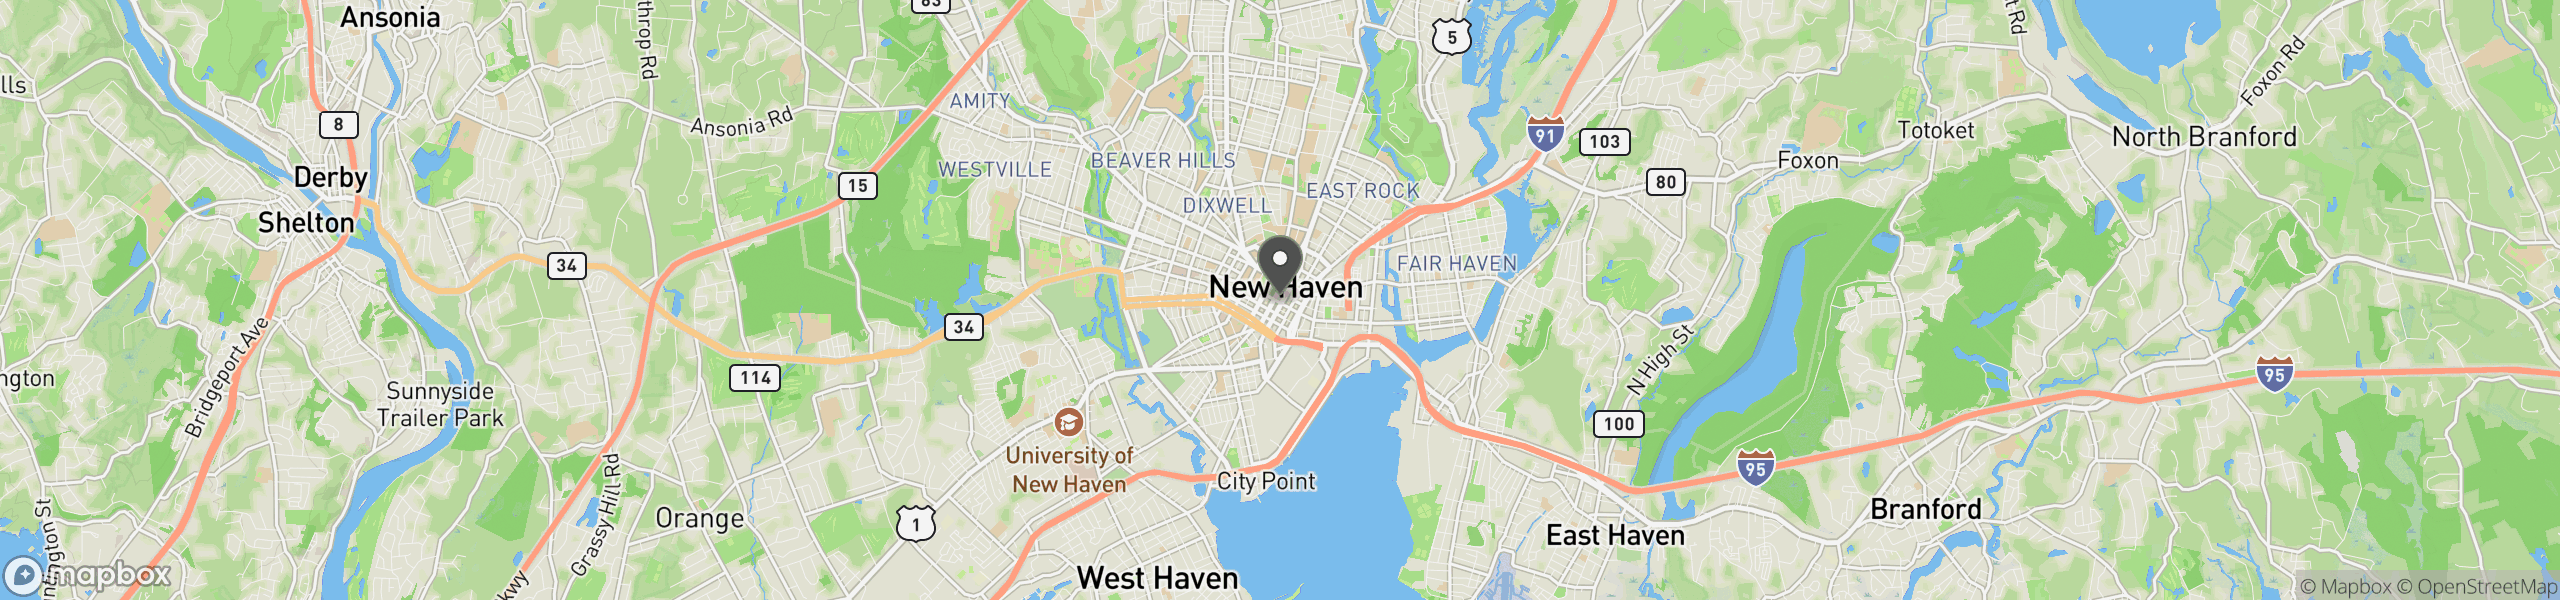 New Haven, CT 06510